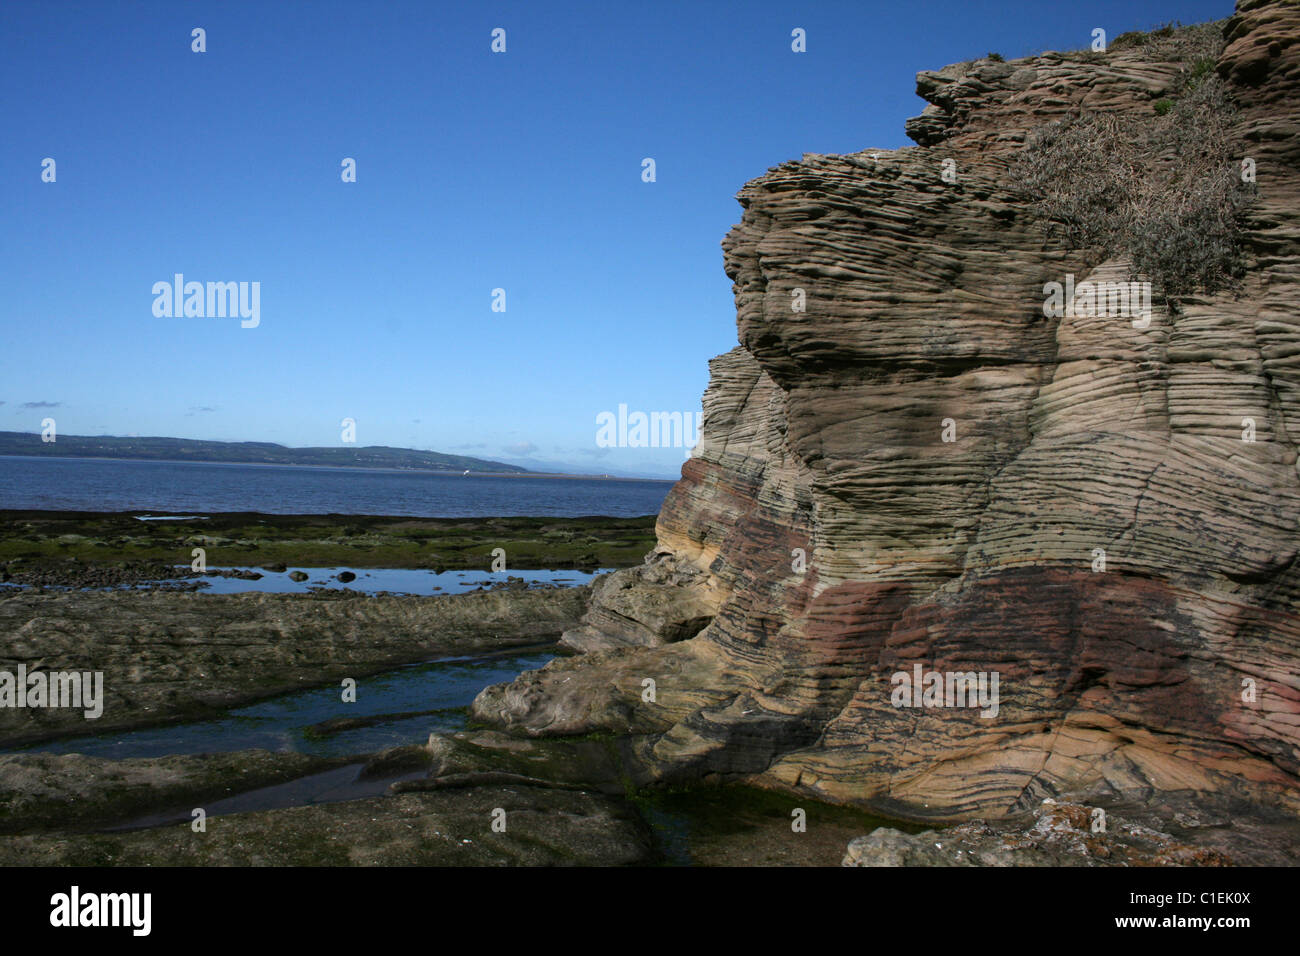 View From Hilbre Island Across The Dee Estuary Towards Wales Stock Photo